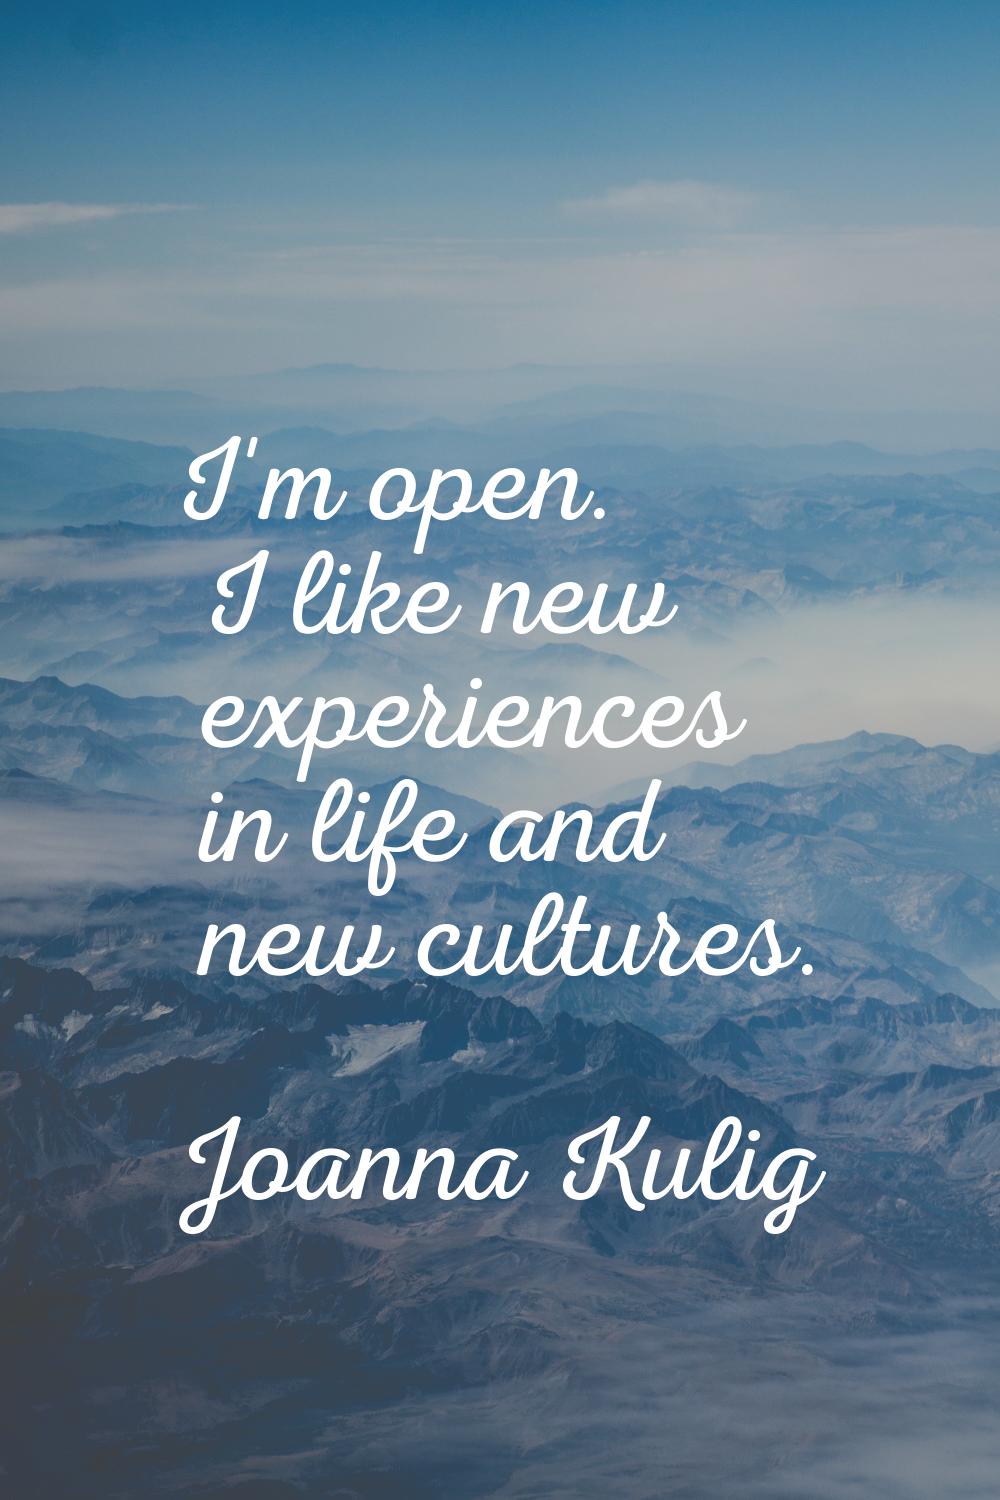 I'm open. I like new experiences in life and new cultures.